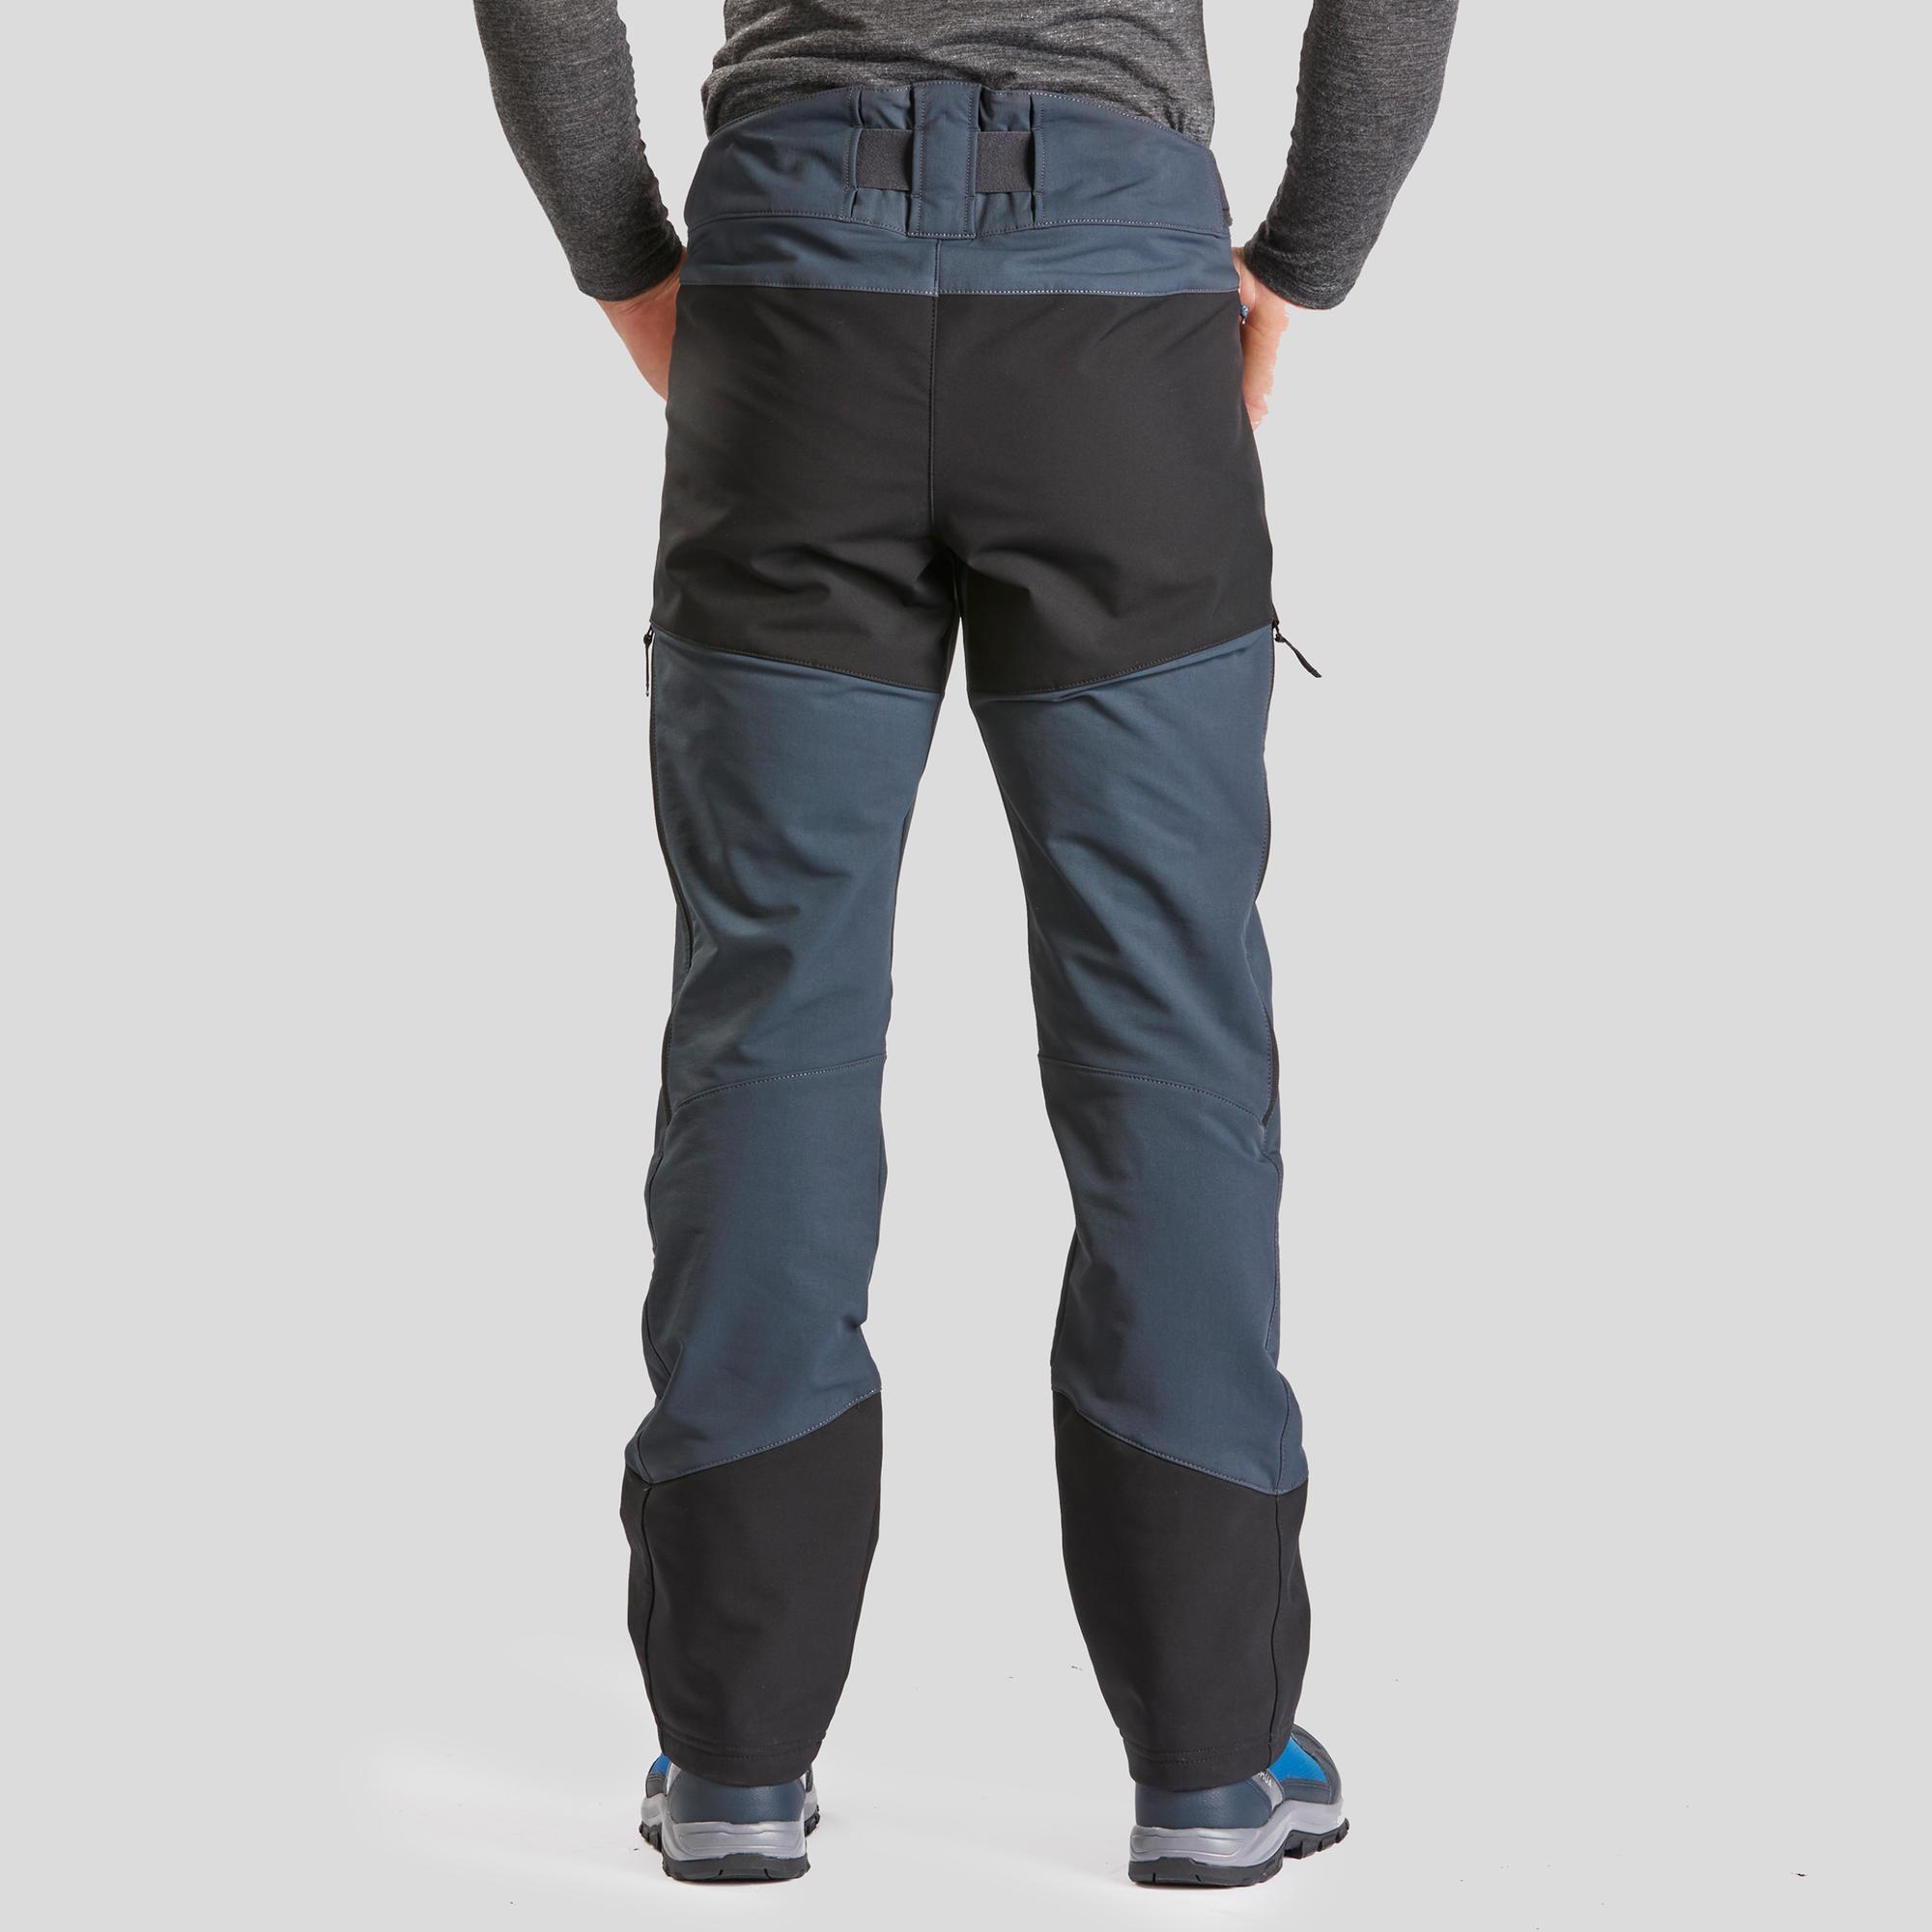 Men’s Warm Water-repellent Ventilated Hiking Trousers - SH500 MOUNTAIN VENTIL   4/9